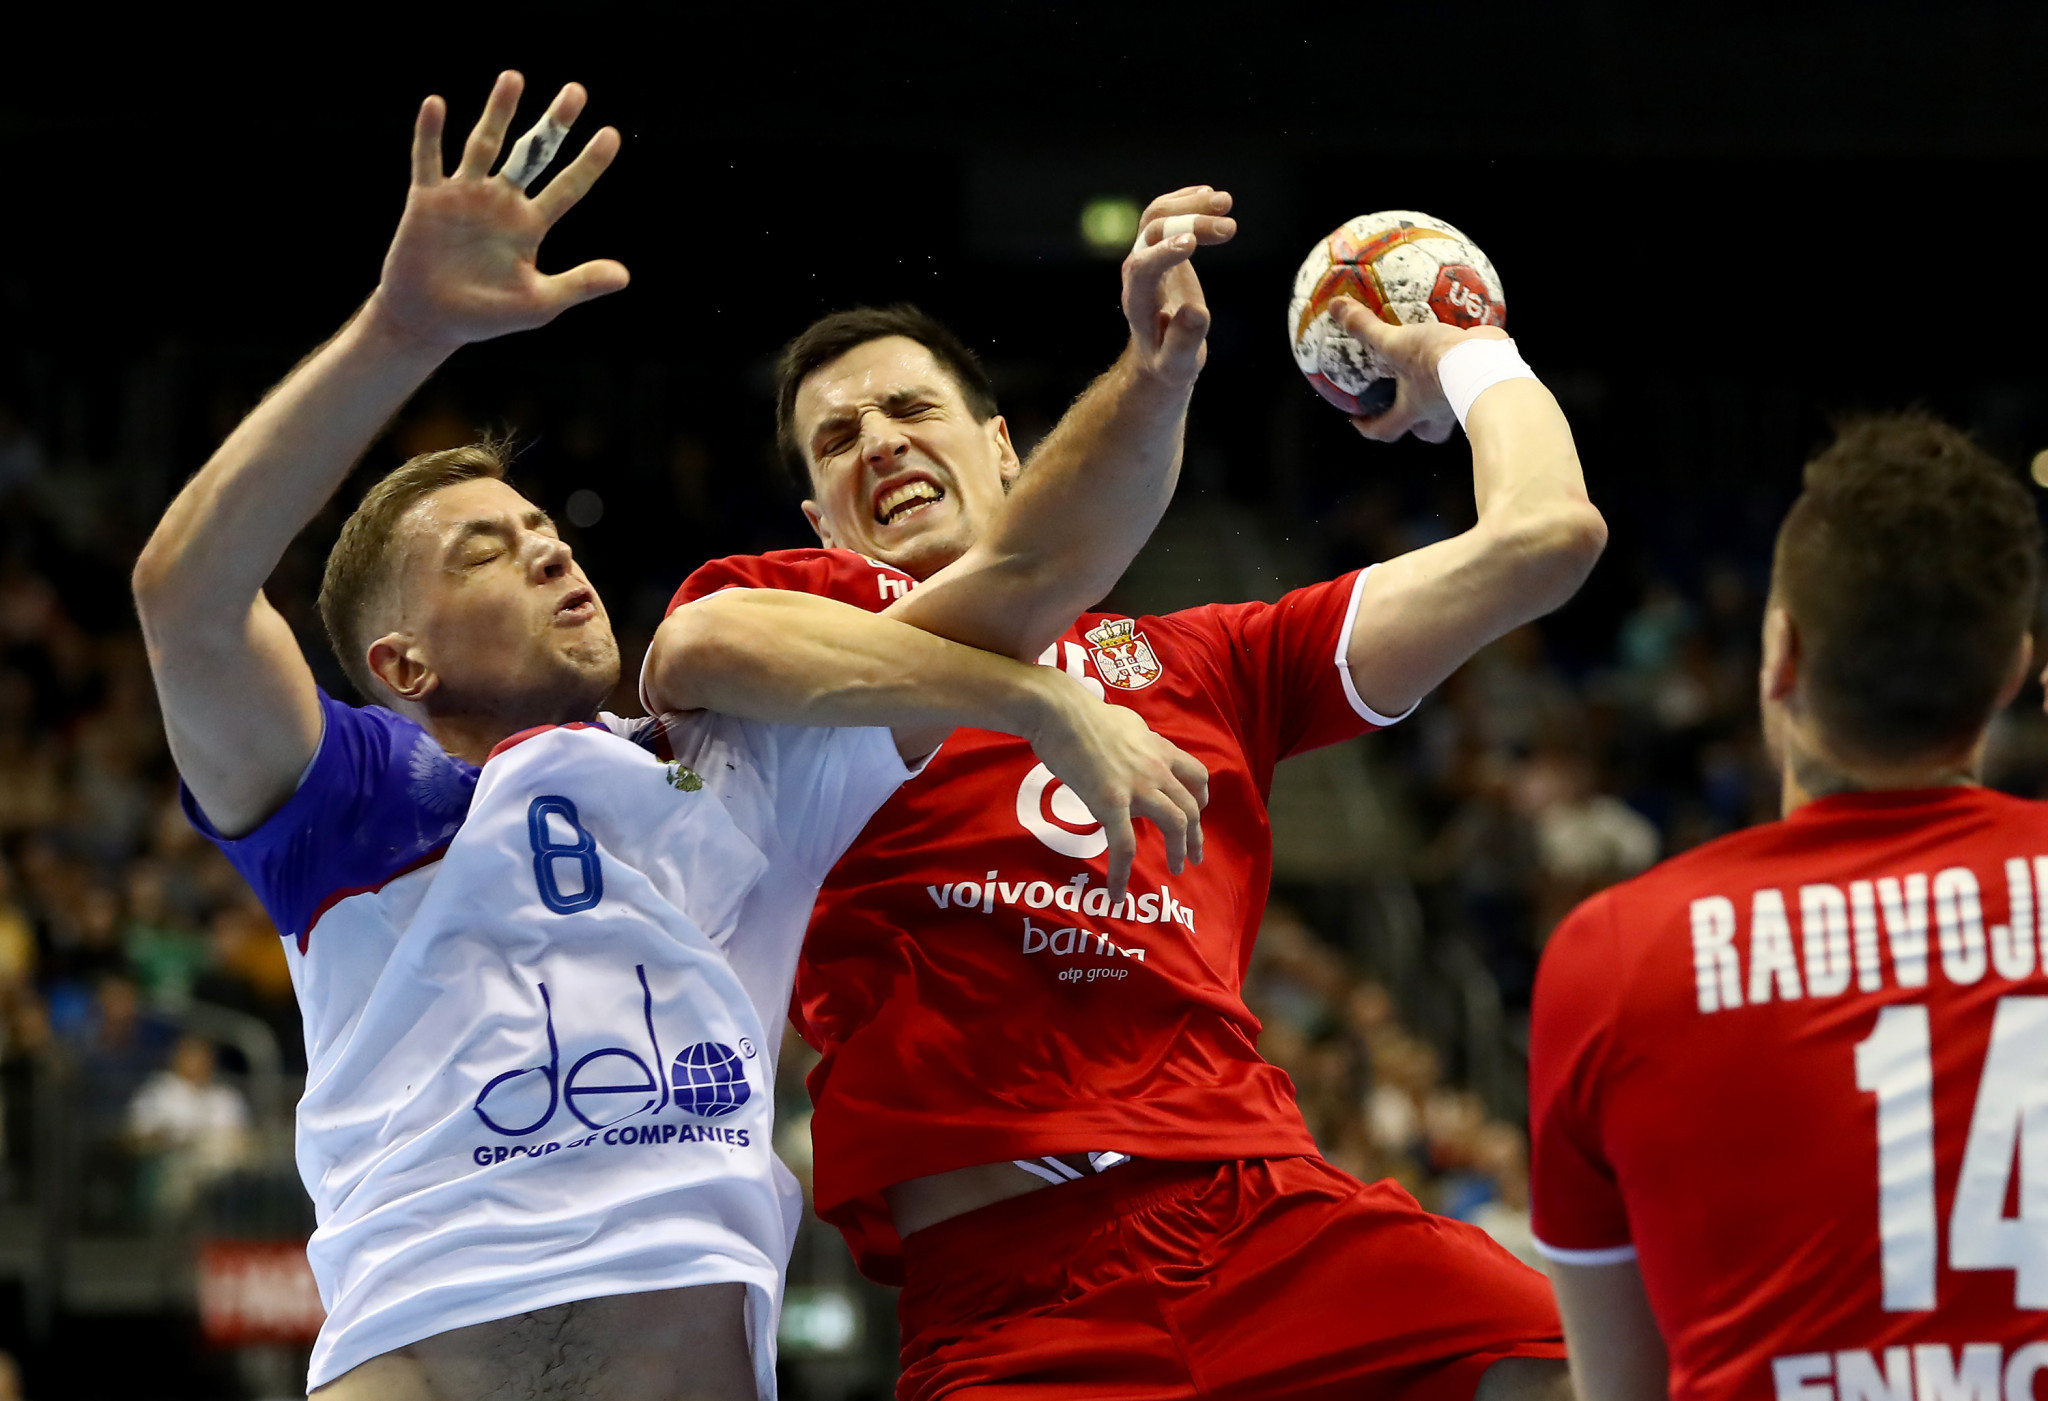 Serbia and Russia drew 30-30 in their Group A clash at the IHF Men's Handball World Championship in Berlin ©Getty Images